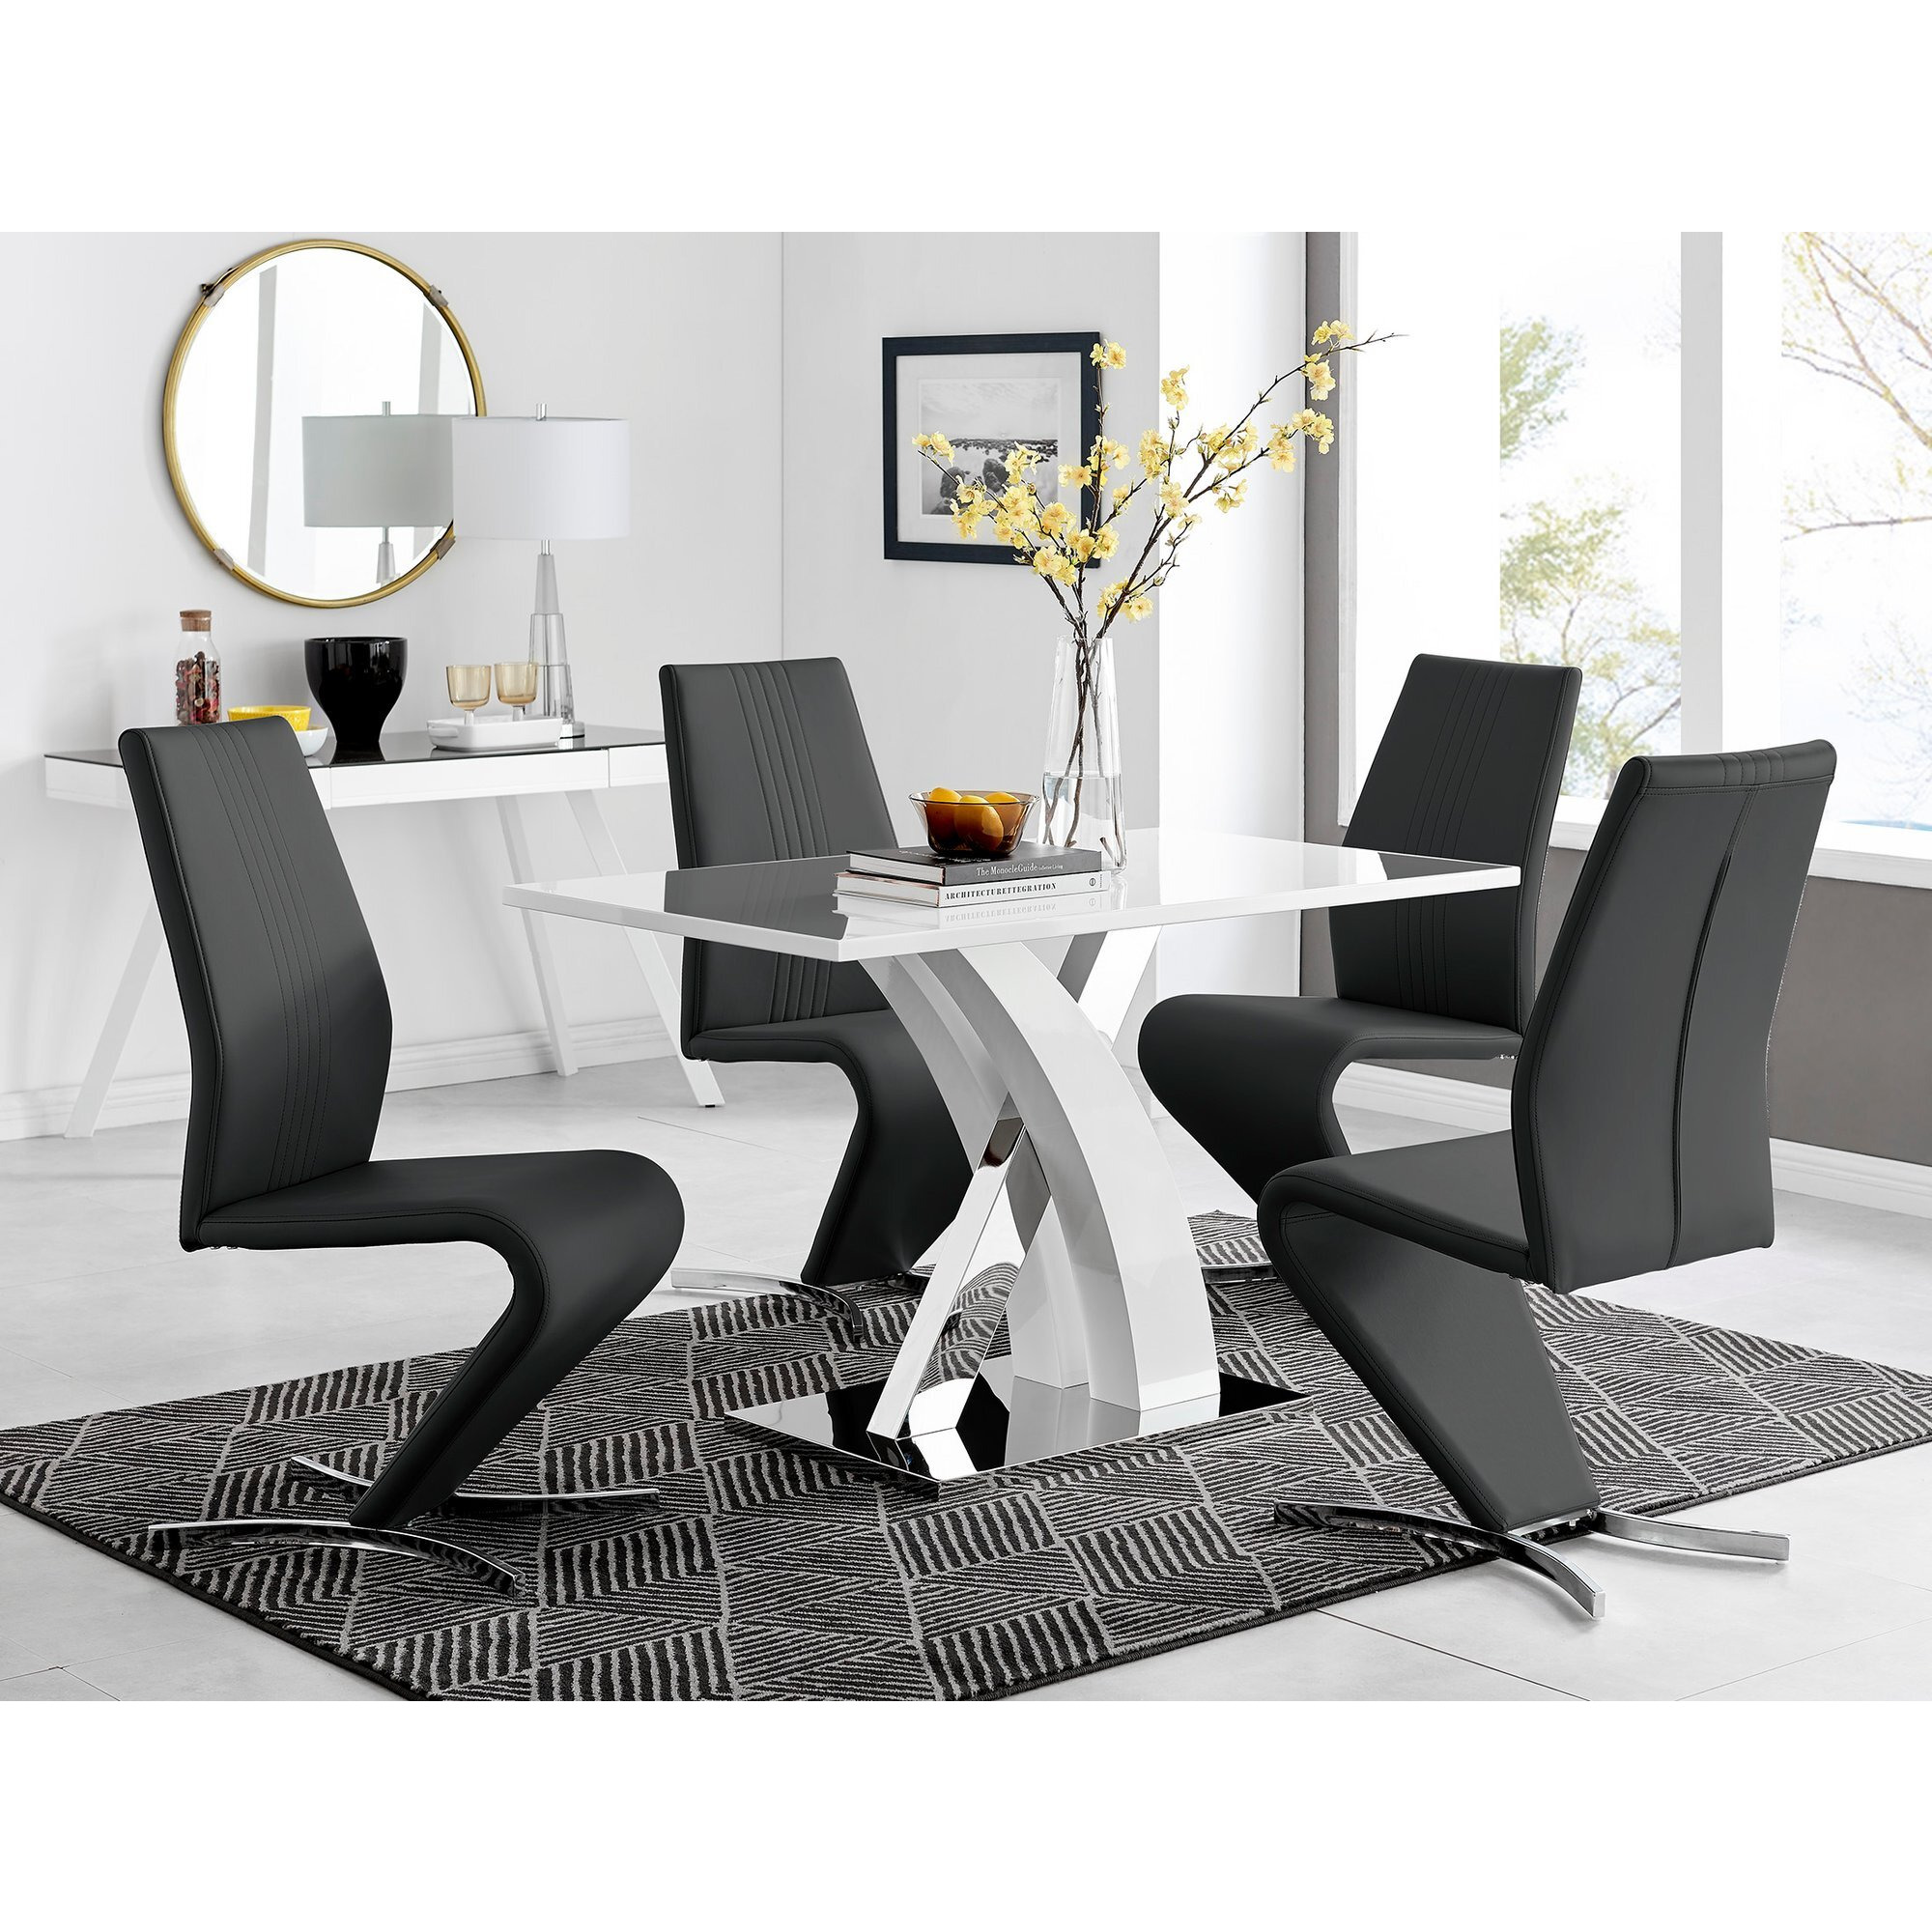 Atlanta White High Gloss And Chrome Metal Rectangle Dining Table And 4 Willow Dining Chairs Set